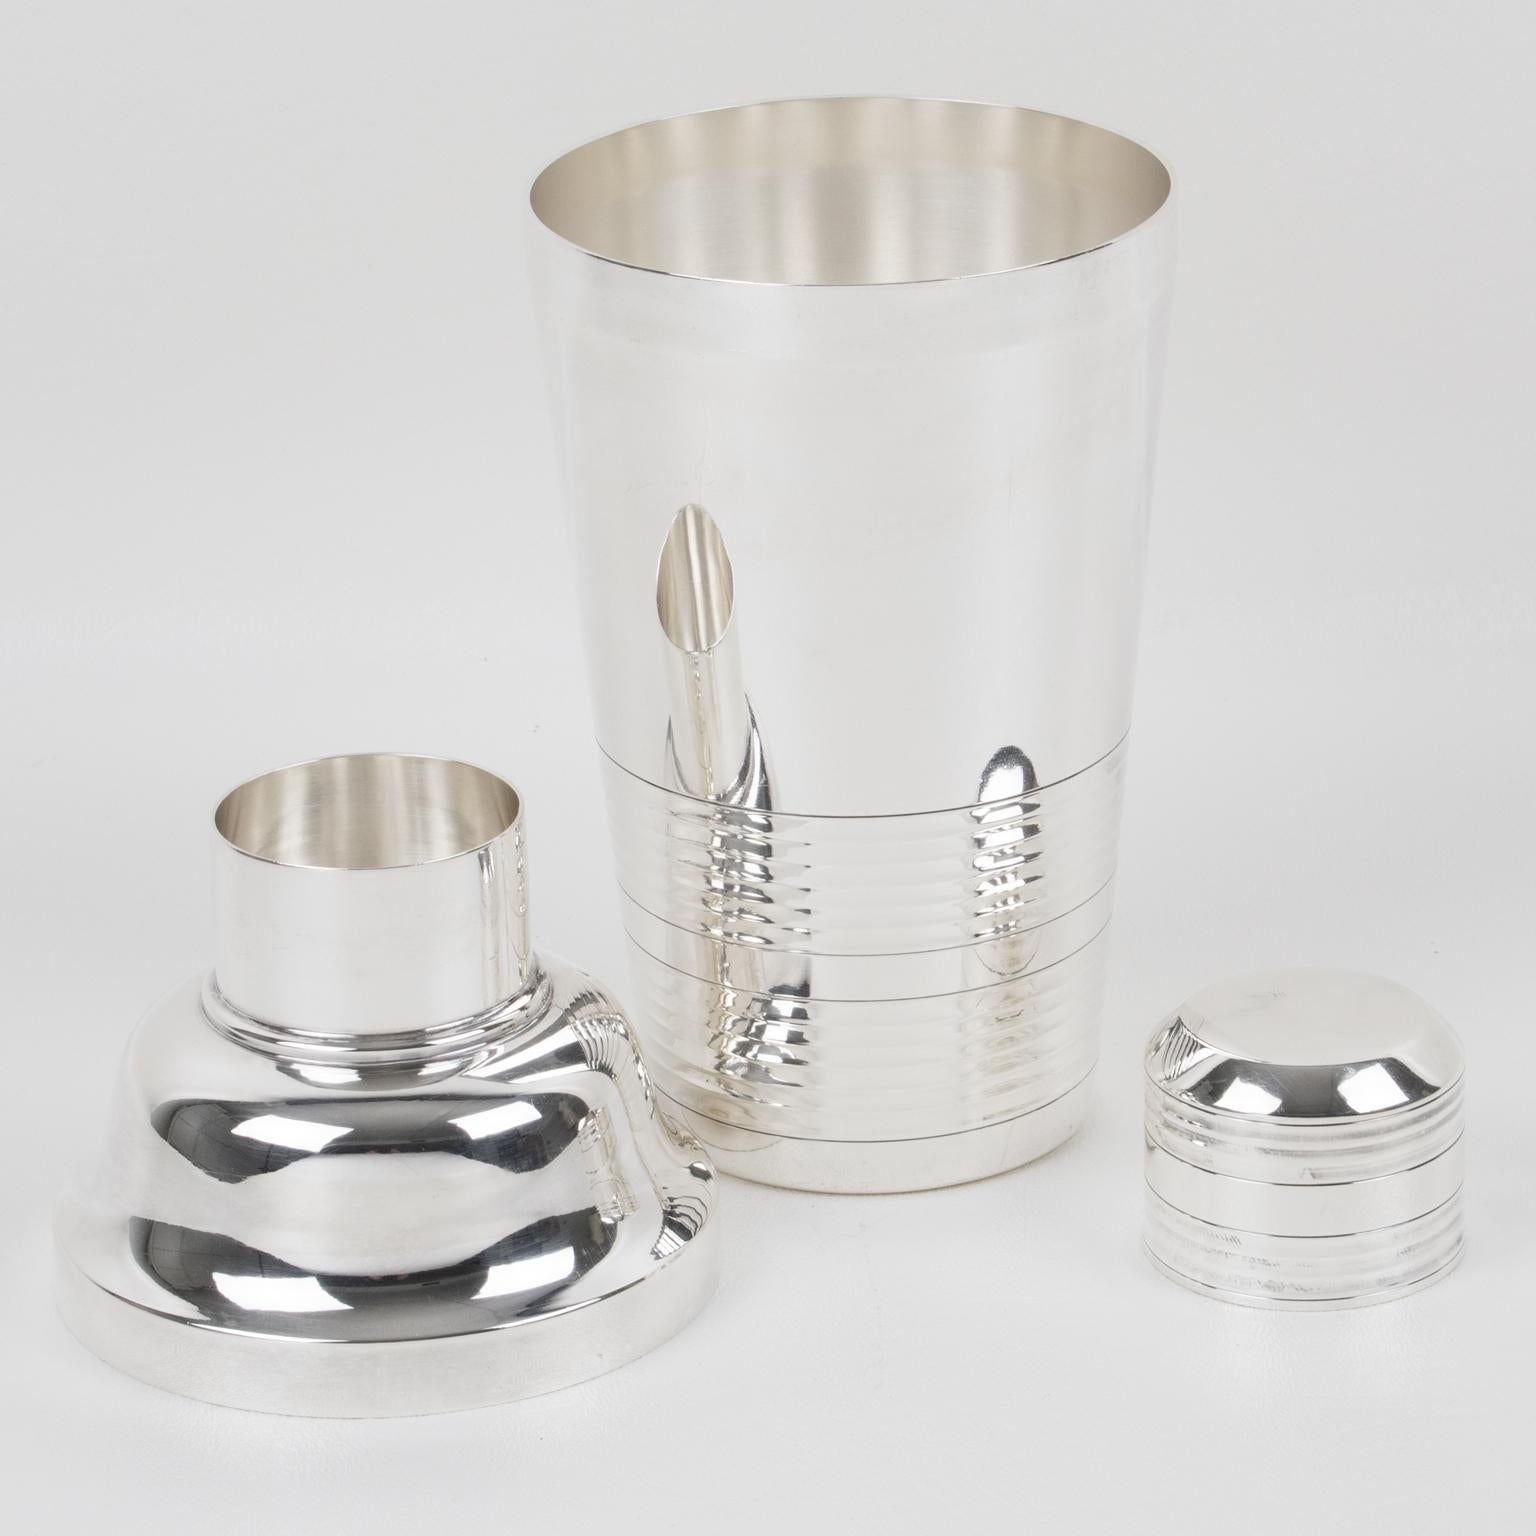 Elegant French Art Deco silver plate cylindrical cocktail or Martini shaker by silversmith Dixi, Paris. Three-sectioned designed cocktail shaker with removable cap and strainer. Lovely geometric shape with typical Deco design. Marked underside with